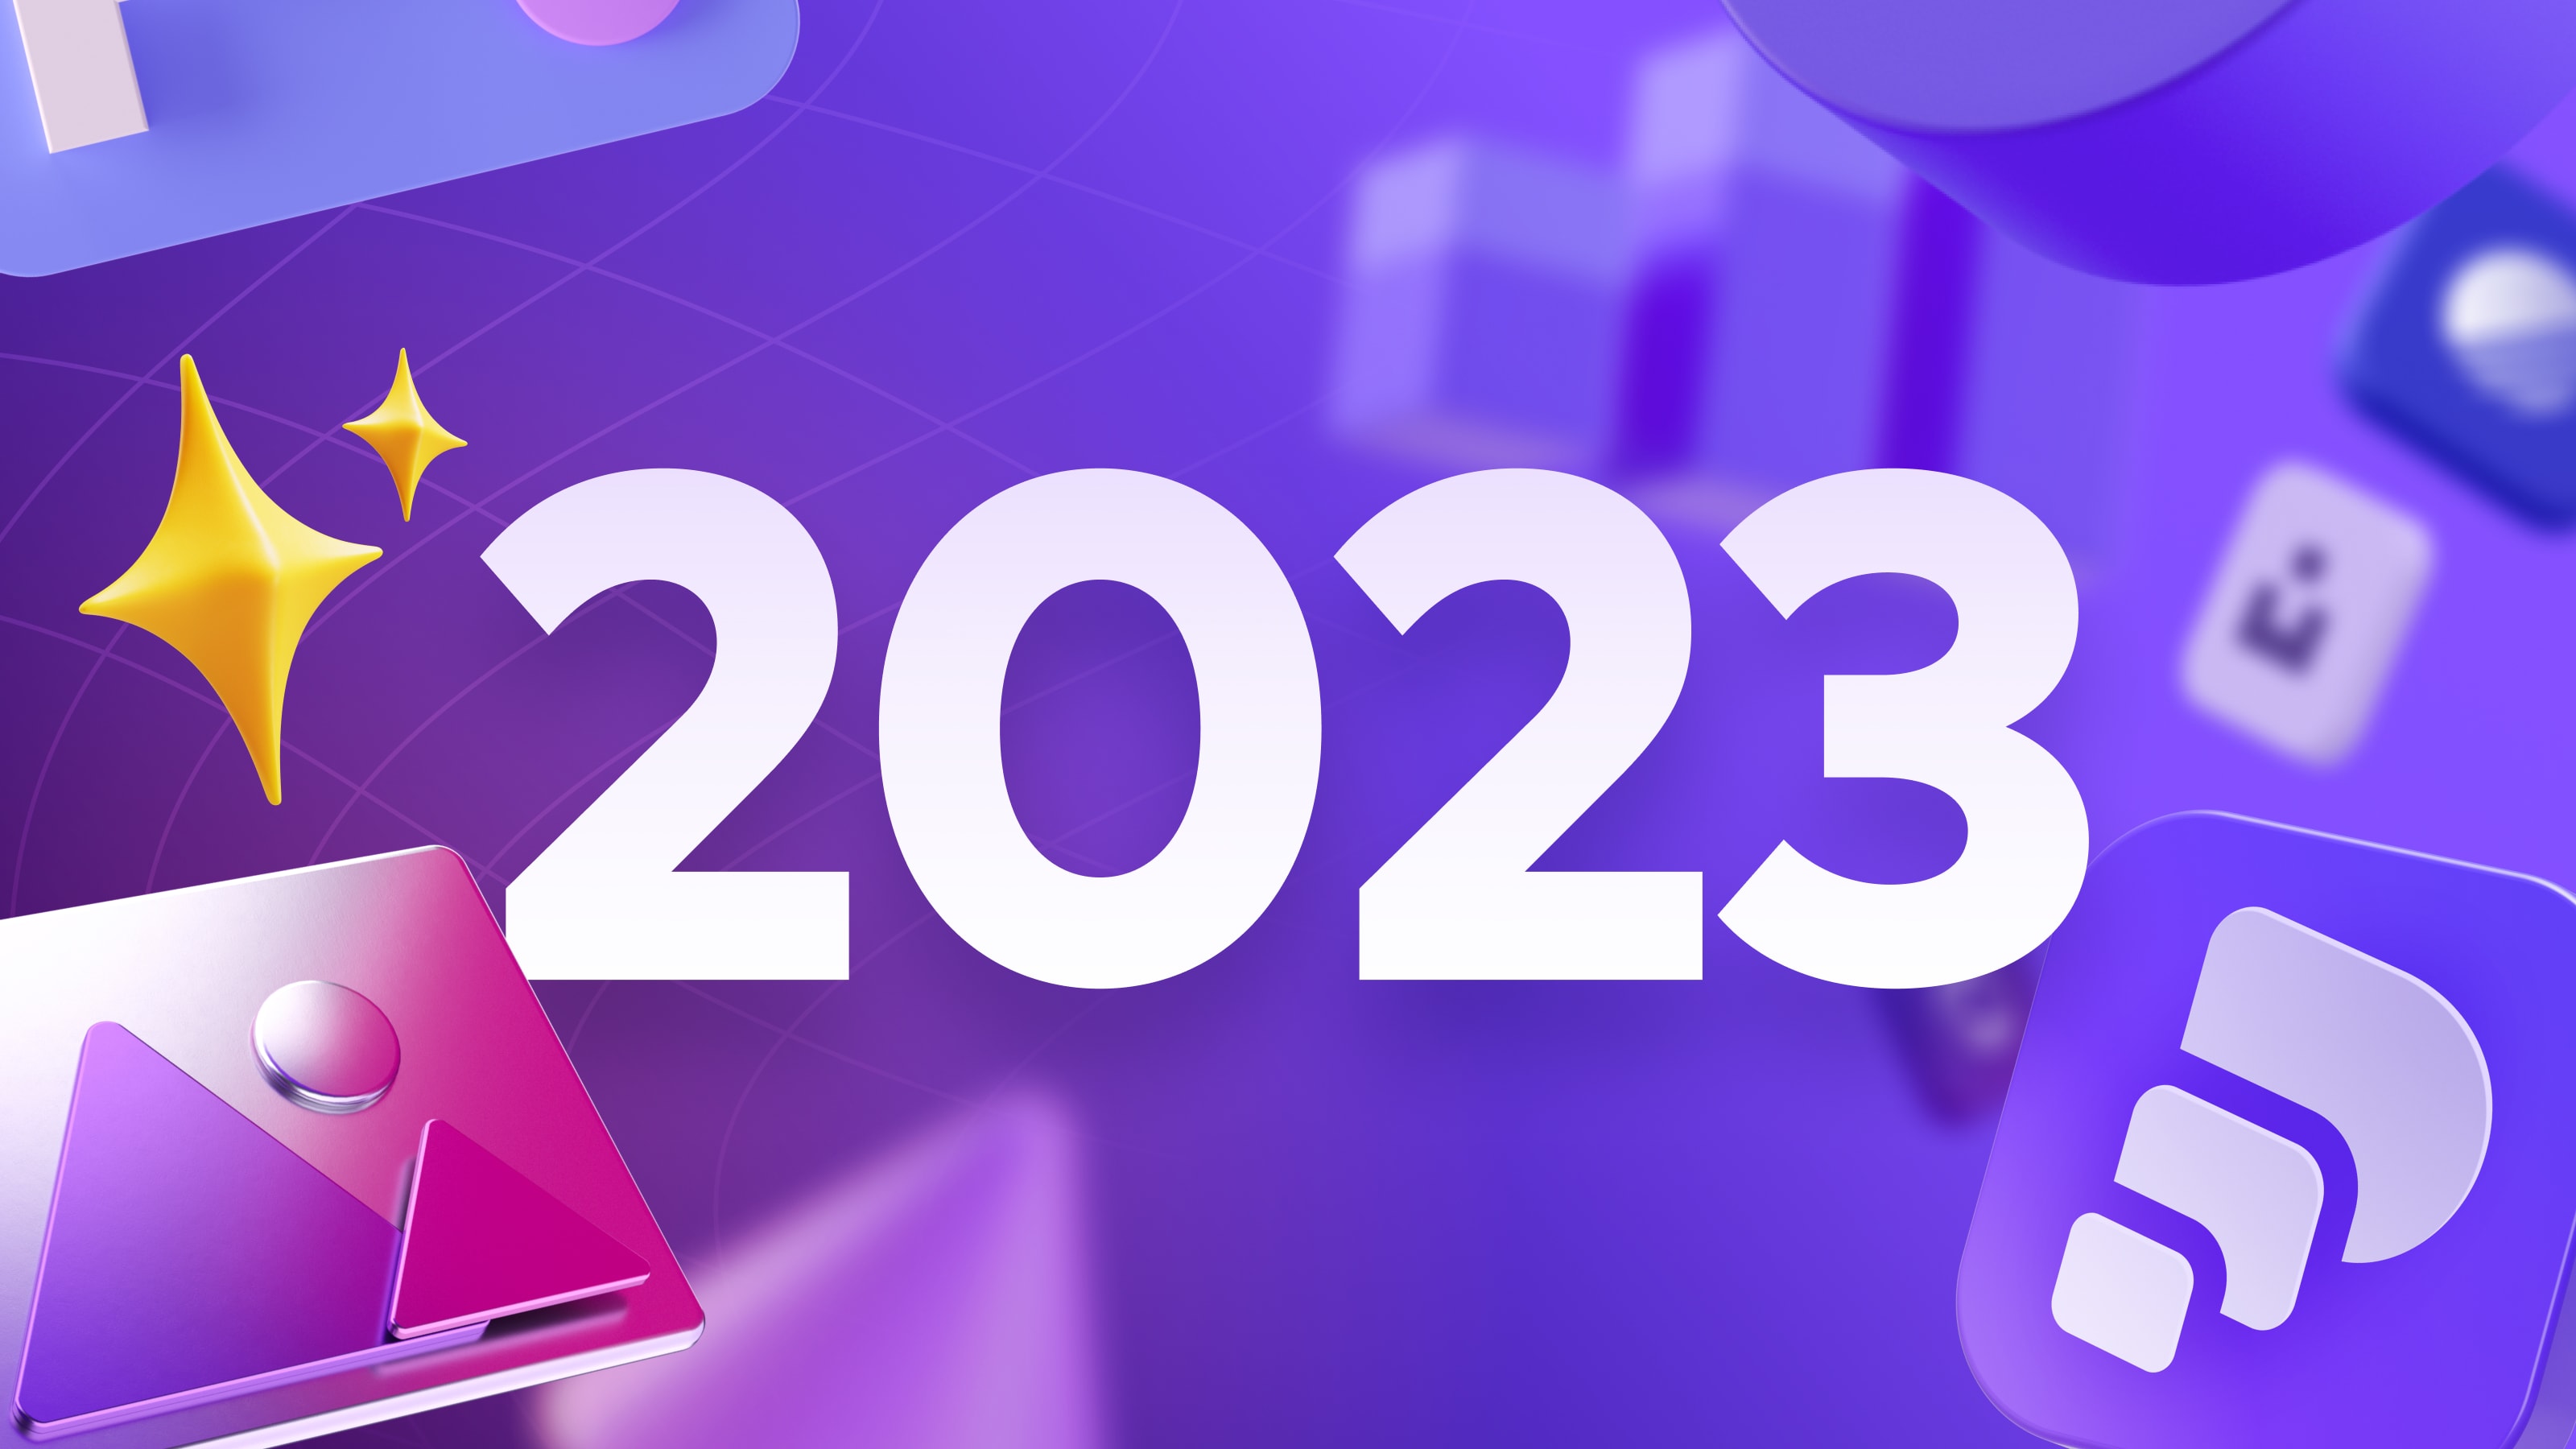 The number 2023 surrounded by the Pitch icon and 3D objects